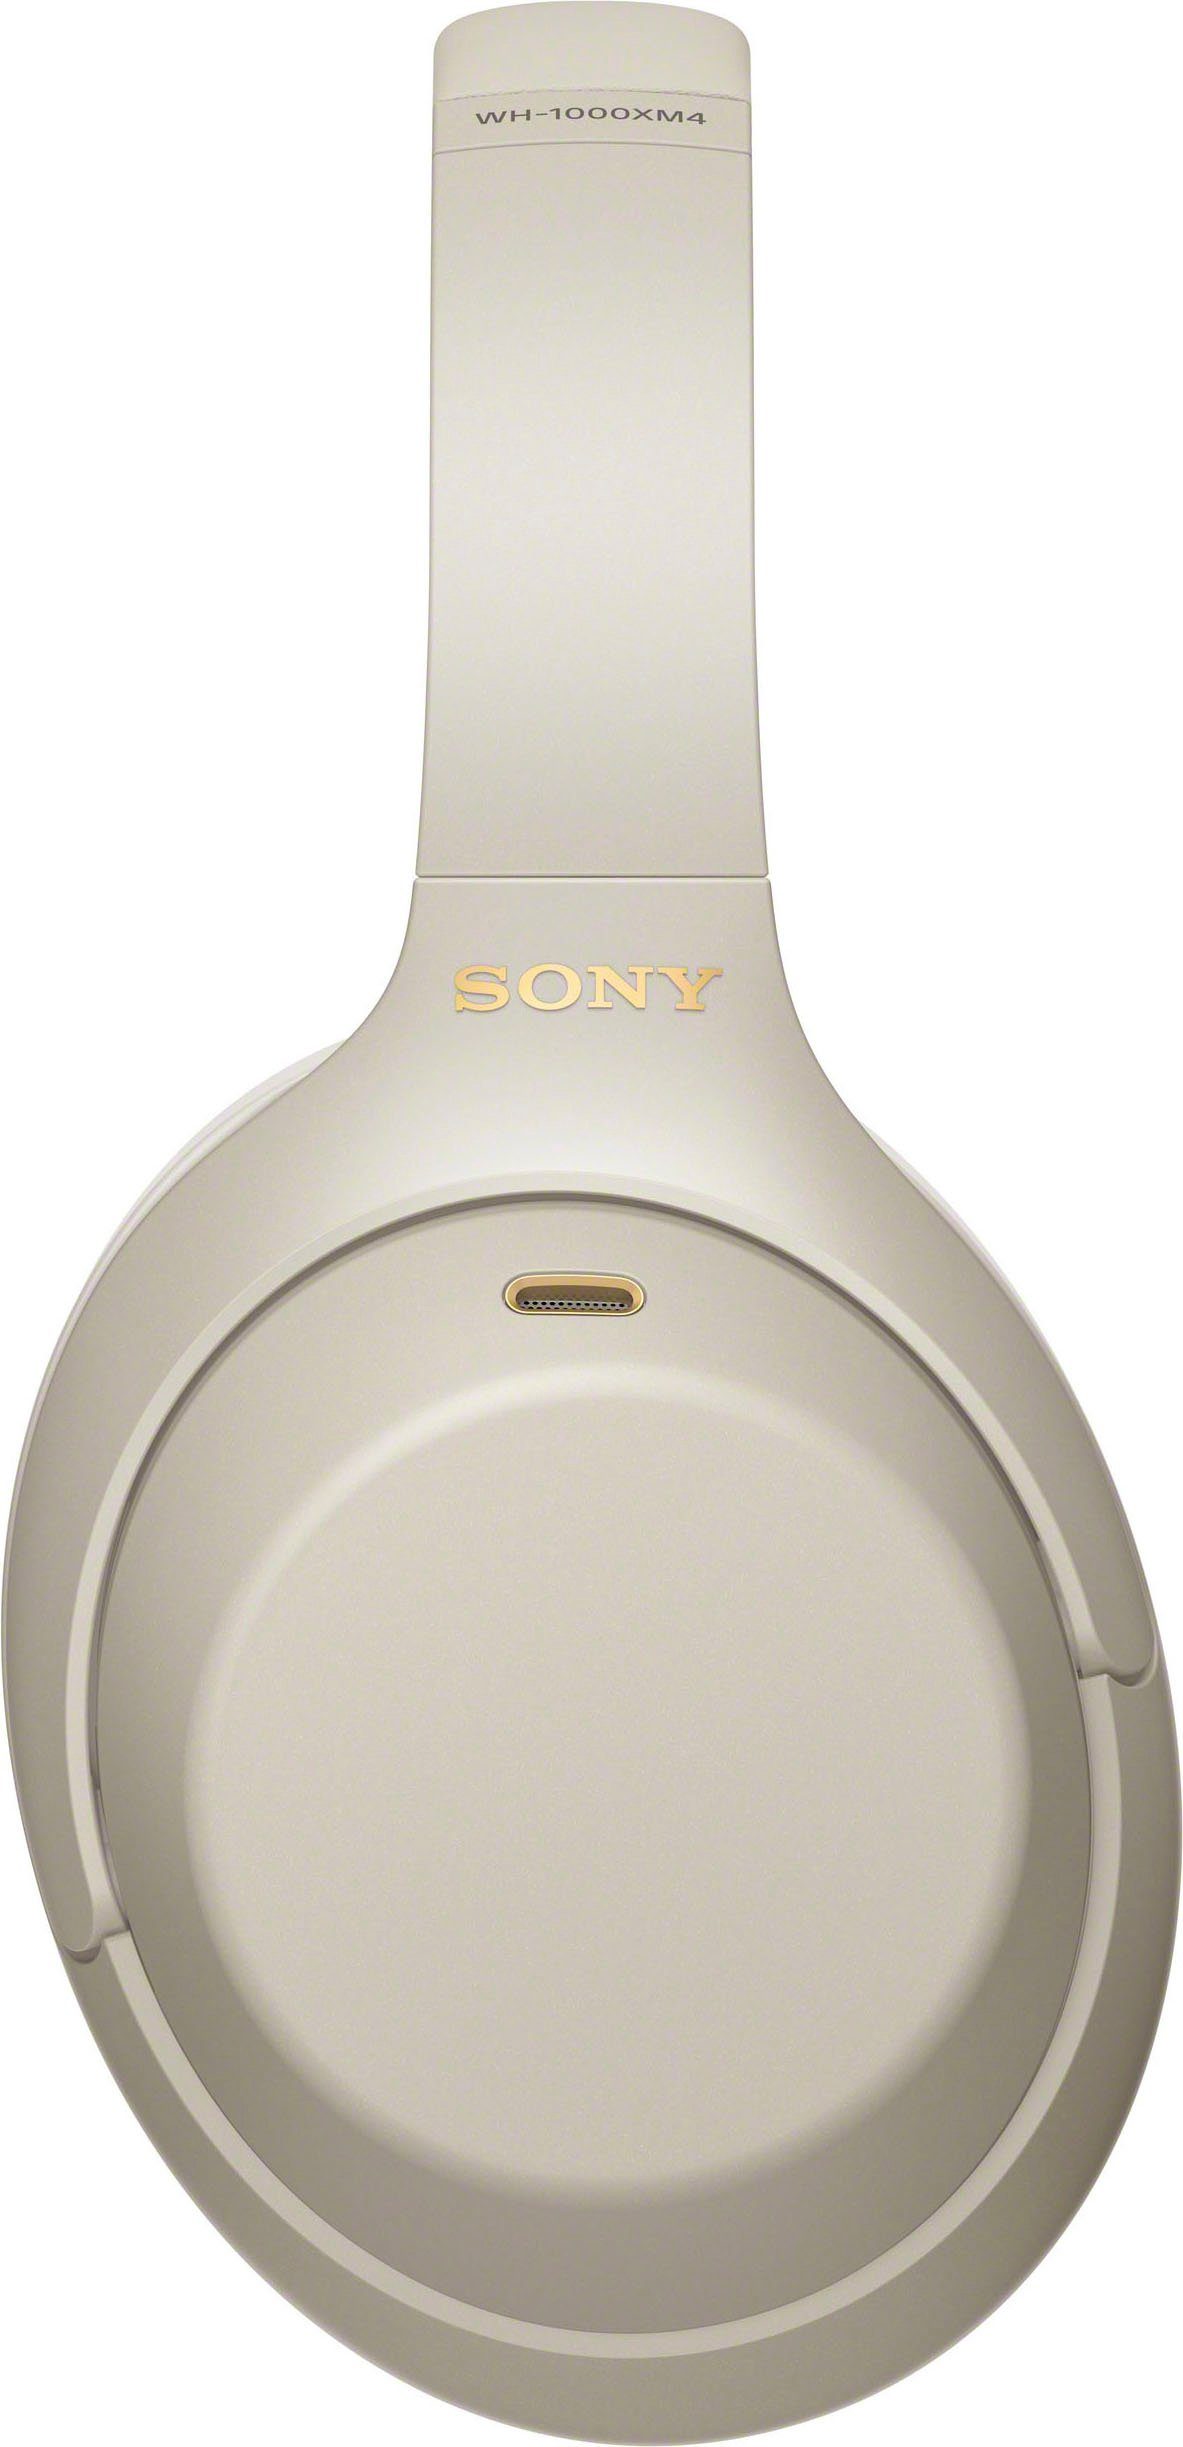 Sony WH-1000XM4 kabelloser Touch NFC, Silber Verbindung via One-Touch NFC, Over-Ear-Kopfhörer Sensor, (Noise-Cancelling, Schnellladefunktion) Bluetooth